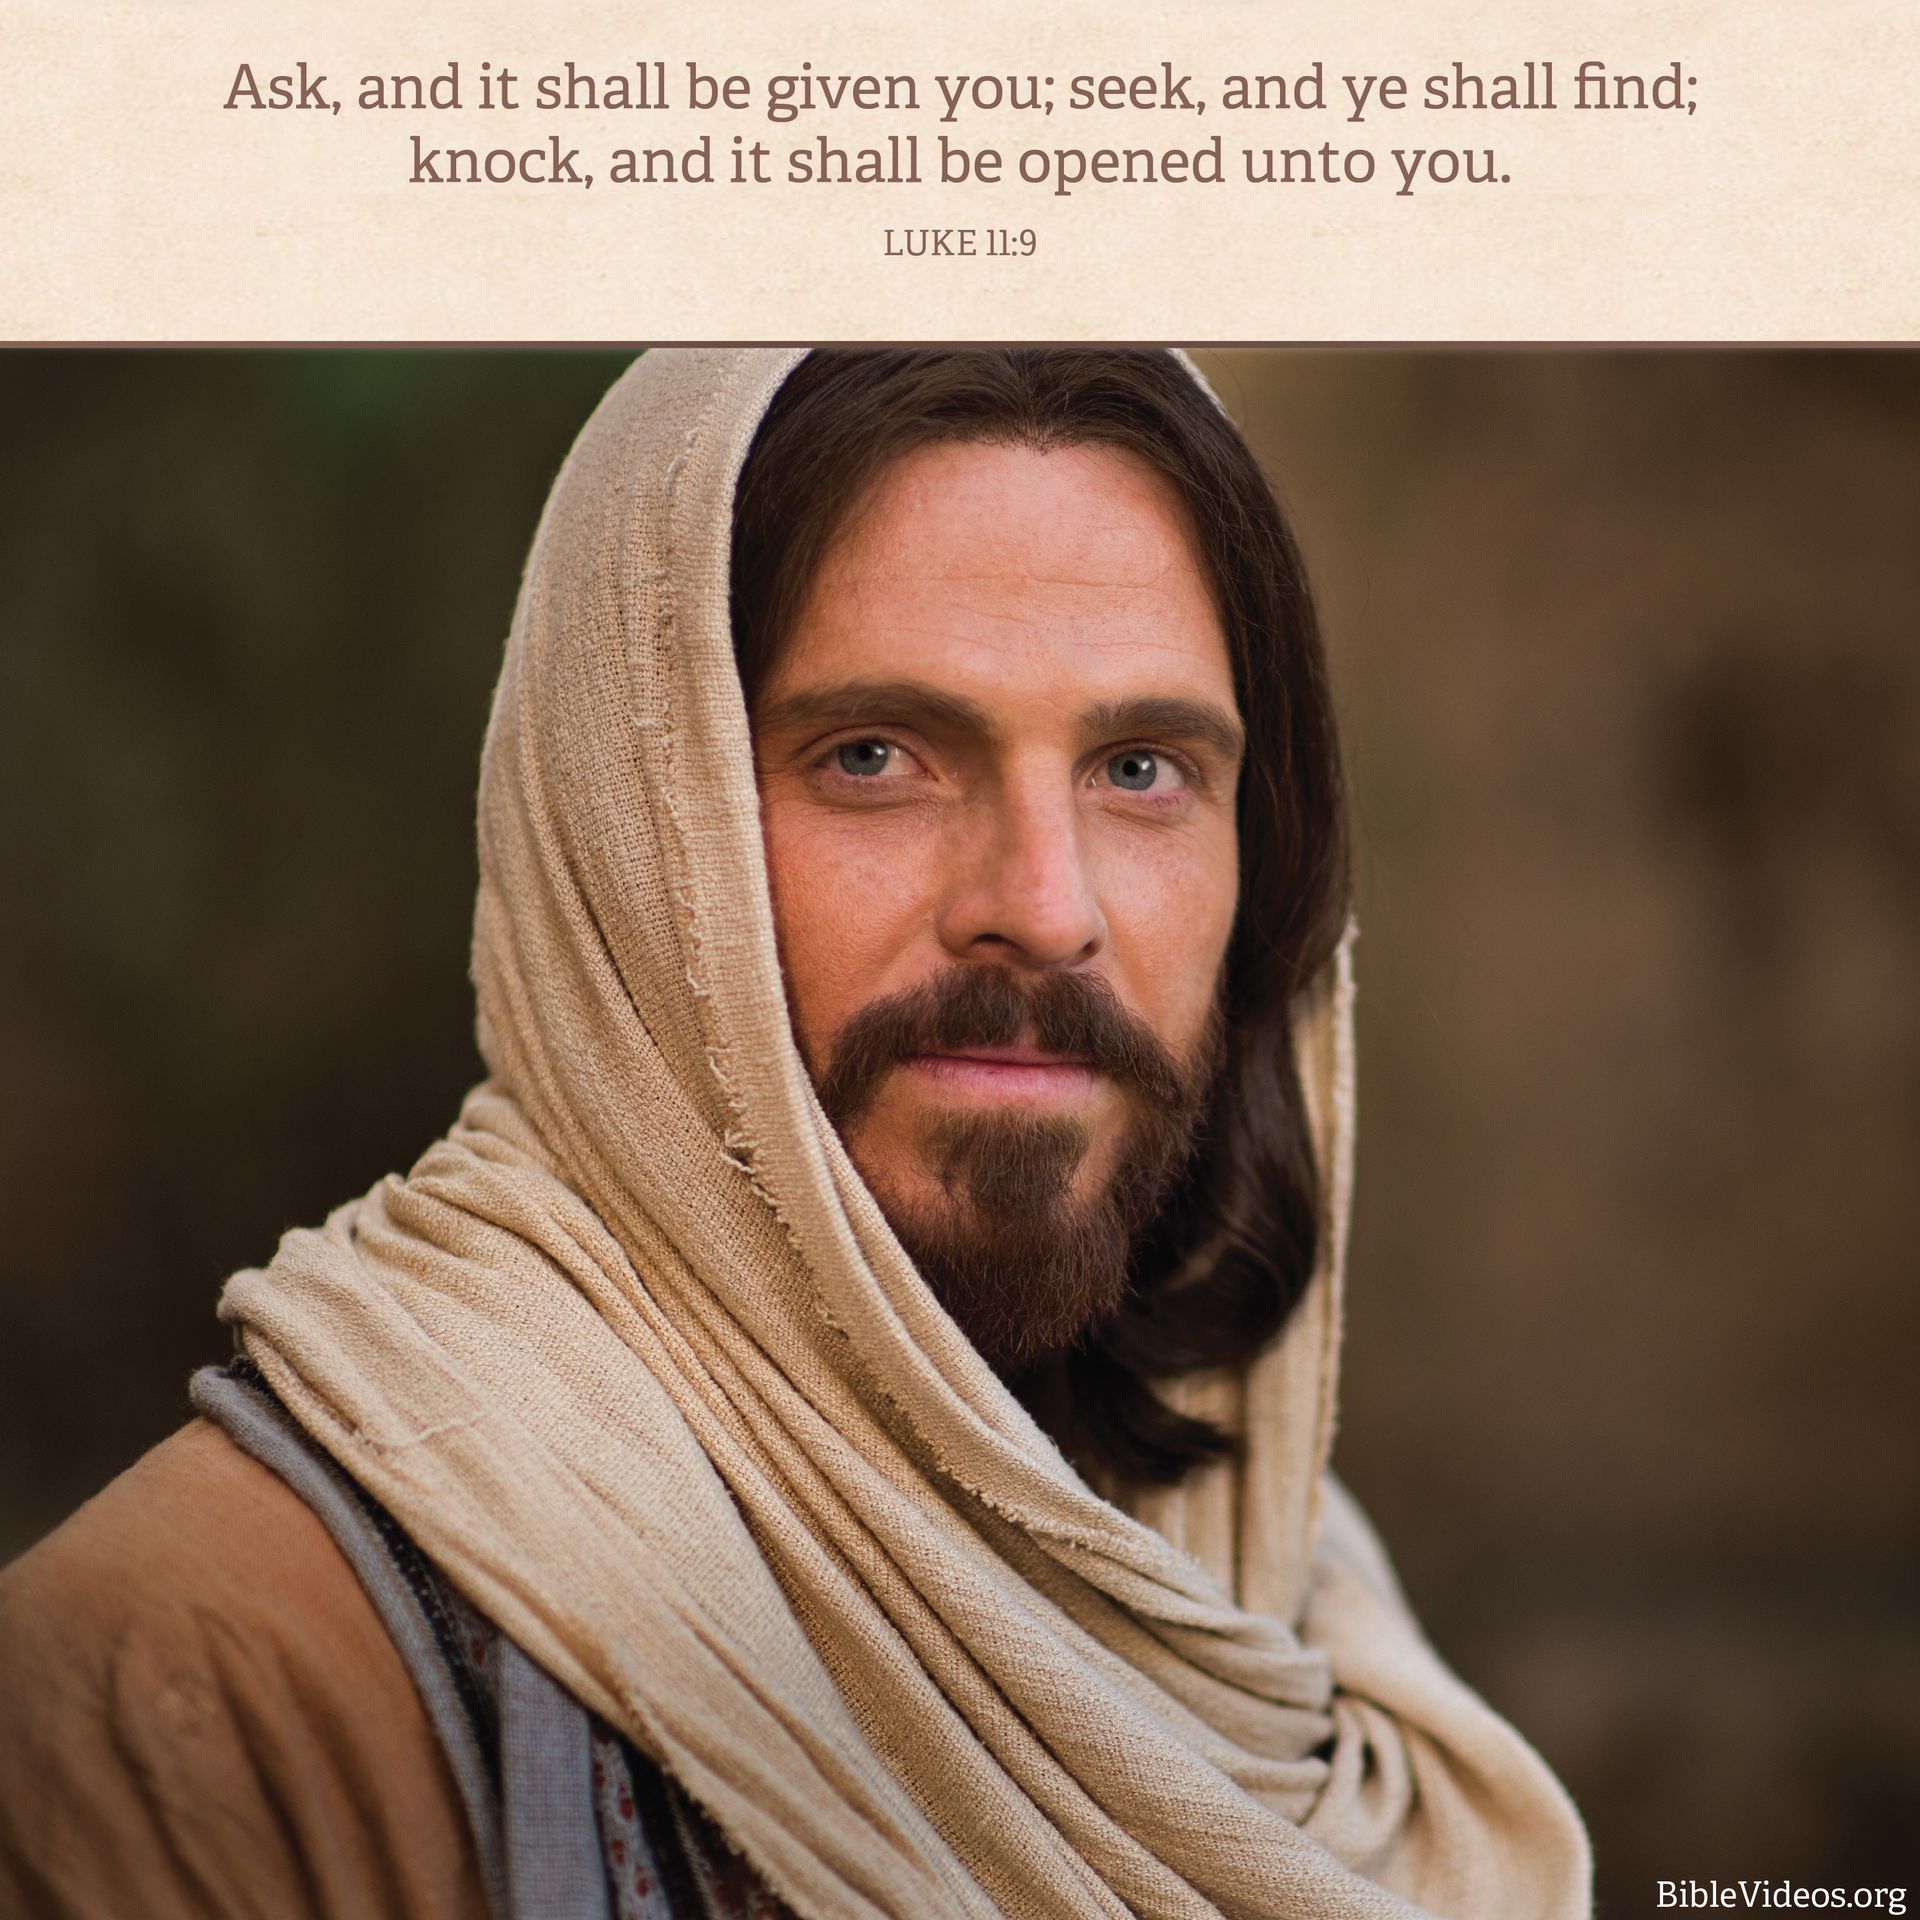 “Ask, and it shall be given you; seek, and ye shall find; knock, and it shall be opened unto you.”—Luke 11:9